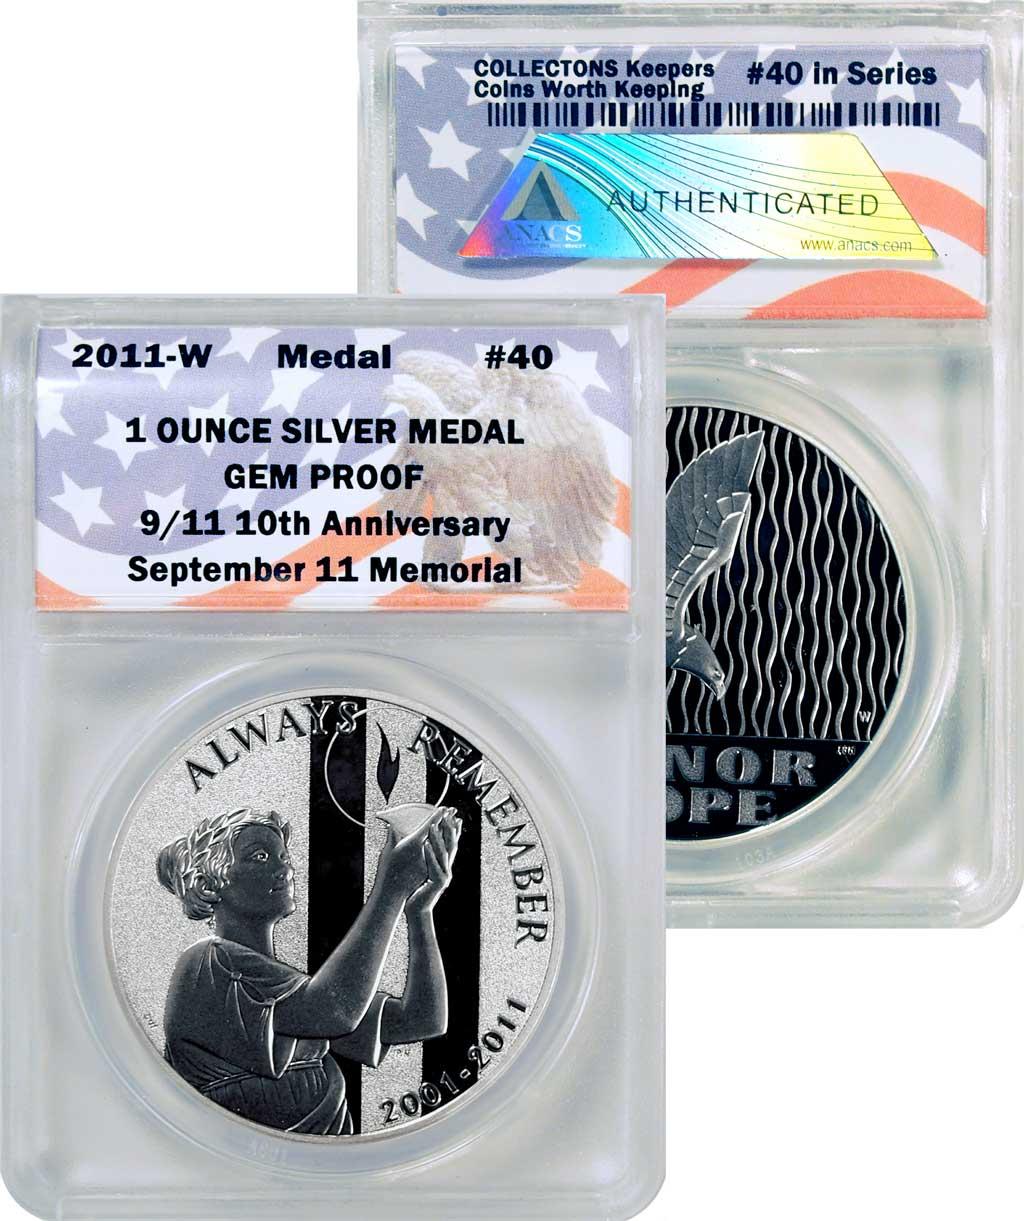 CollecTons Keepers #40: 2011-W September 11 National Medal - 1 ounce Silver Proof Certified in Exclusive ANACS GEM Proof Holder